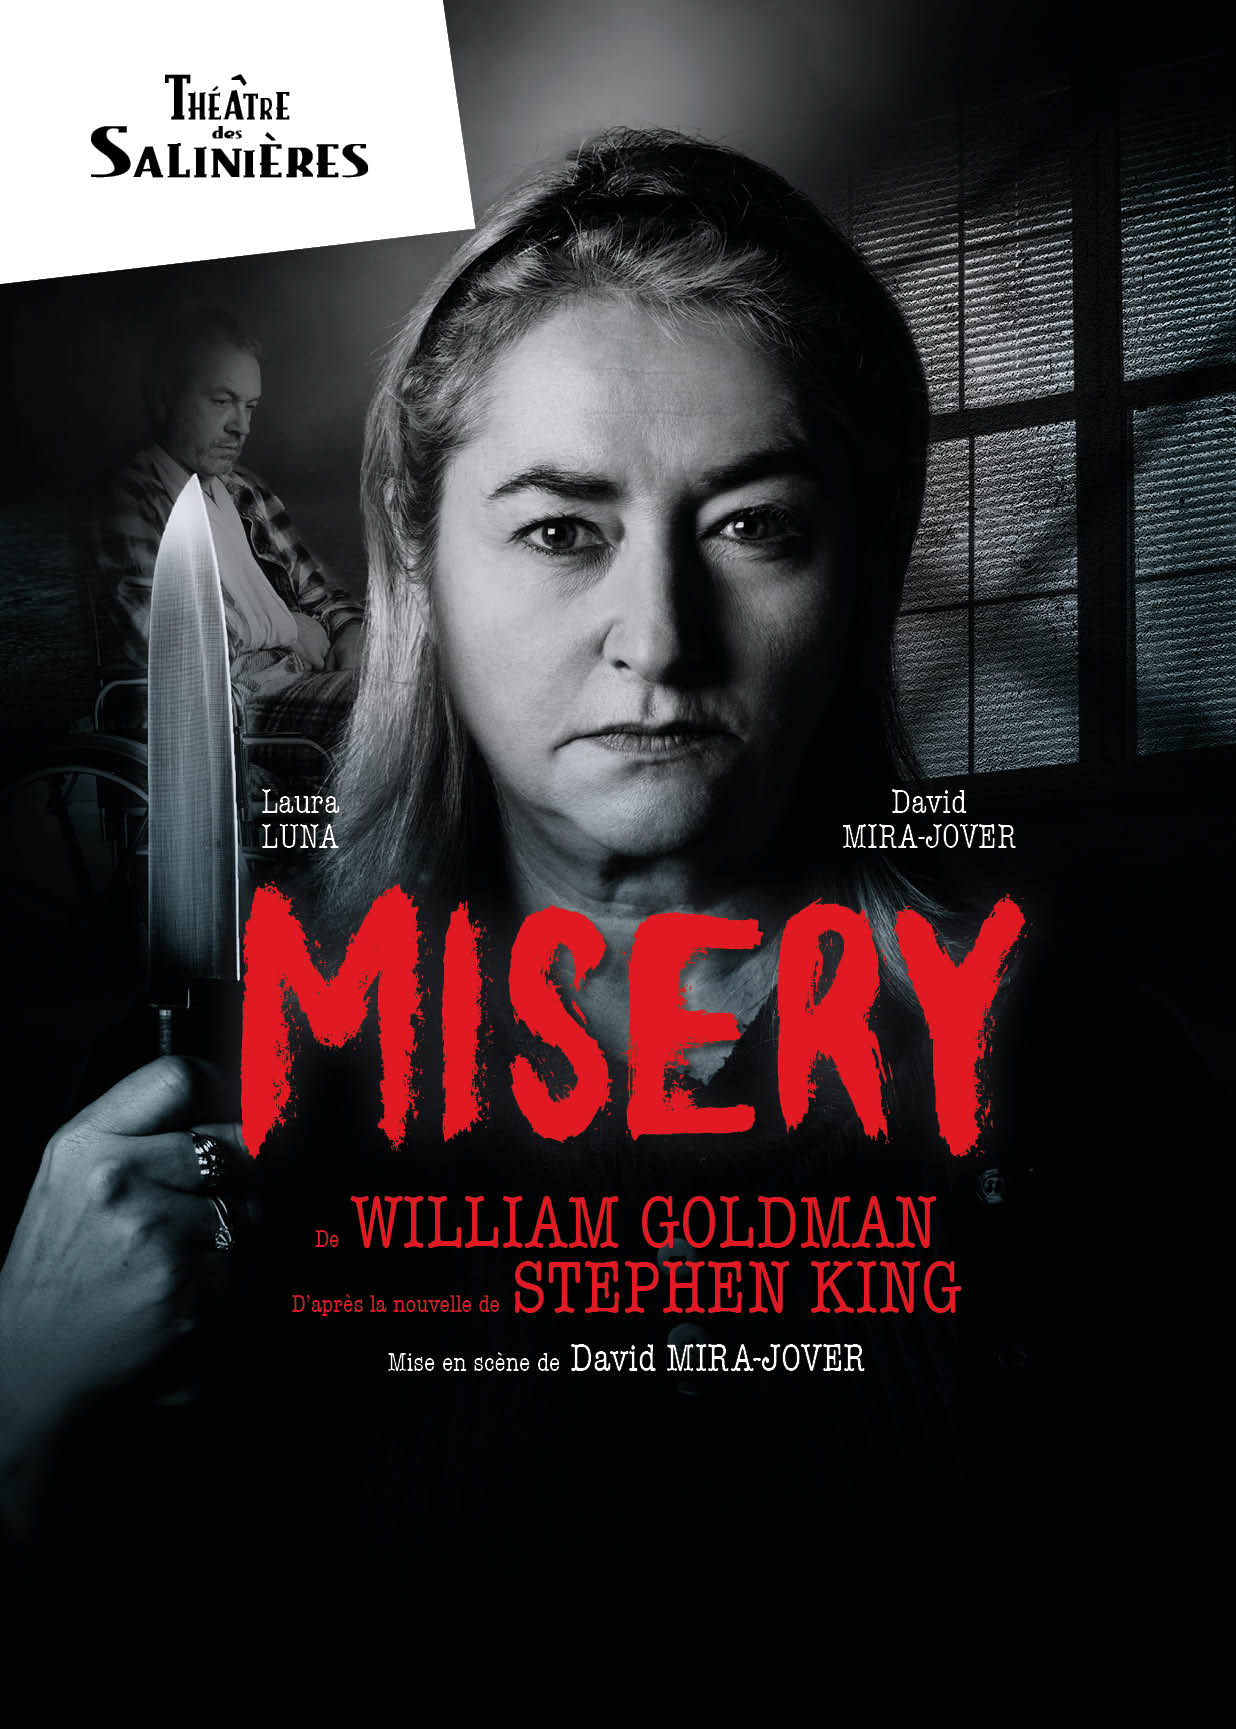 https://the-place-to-be.fr/wp-content/uploads/2020/09/misery-theatre-salinieres-bordeaux-2020.jpg